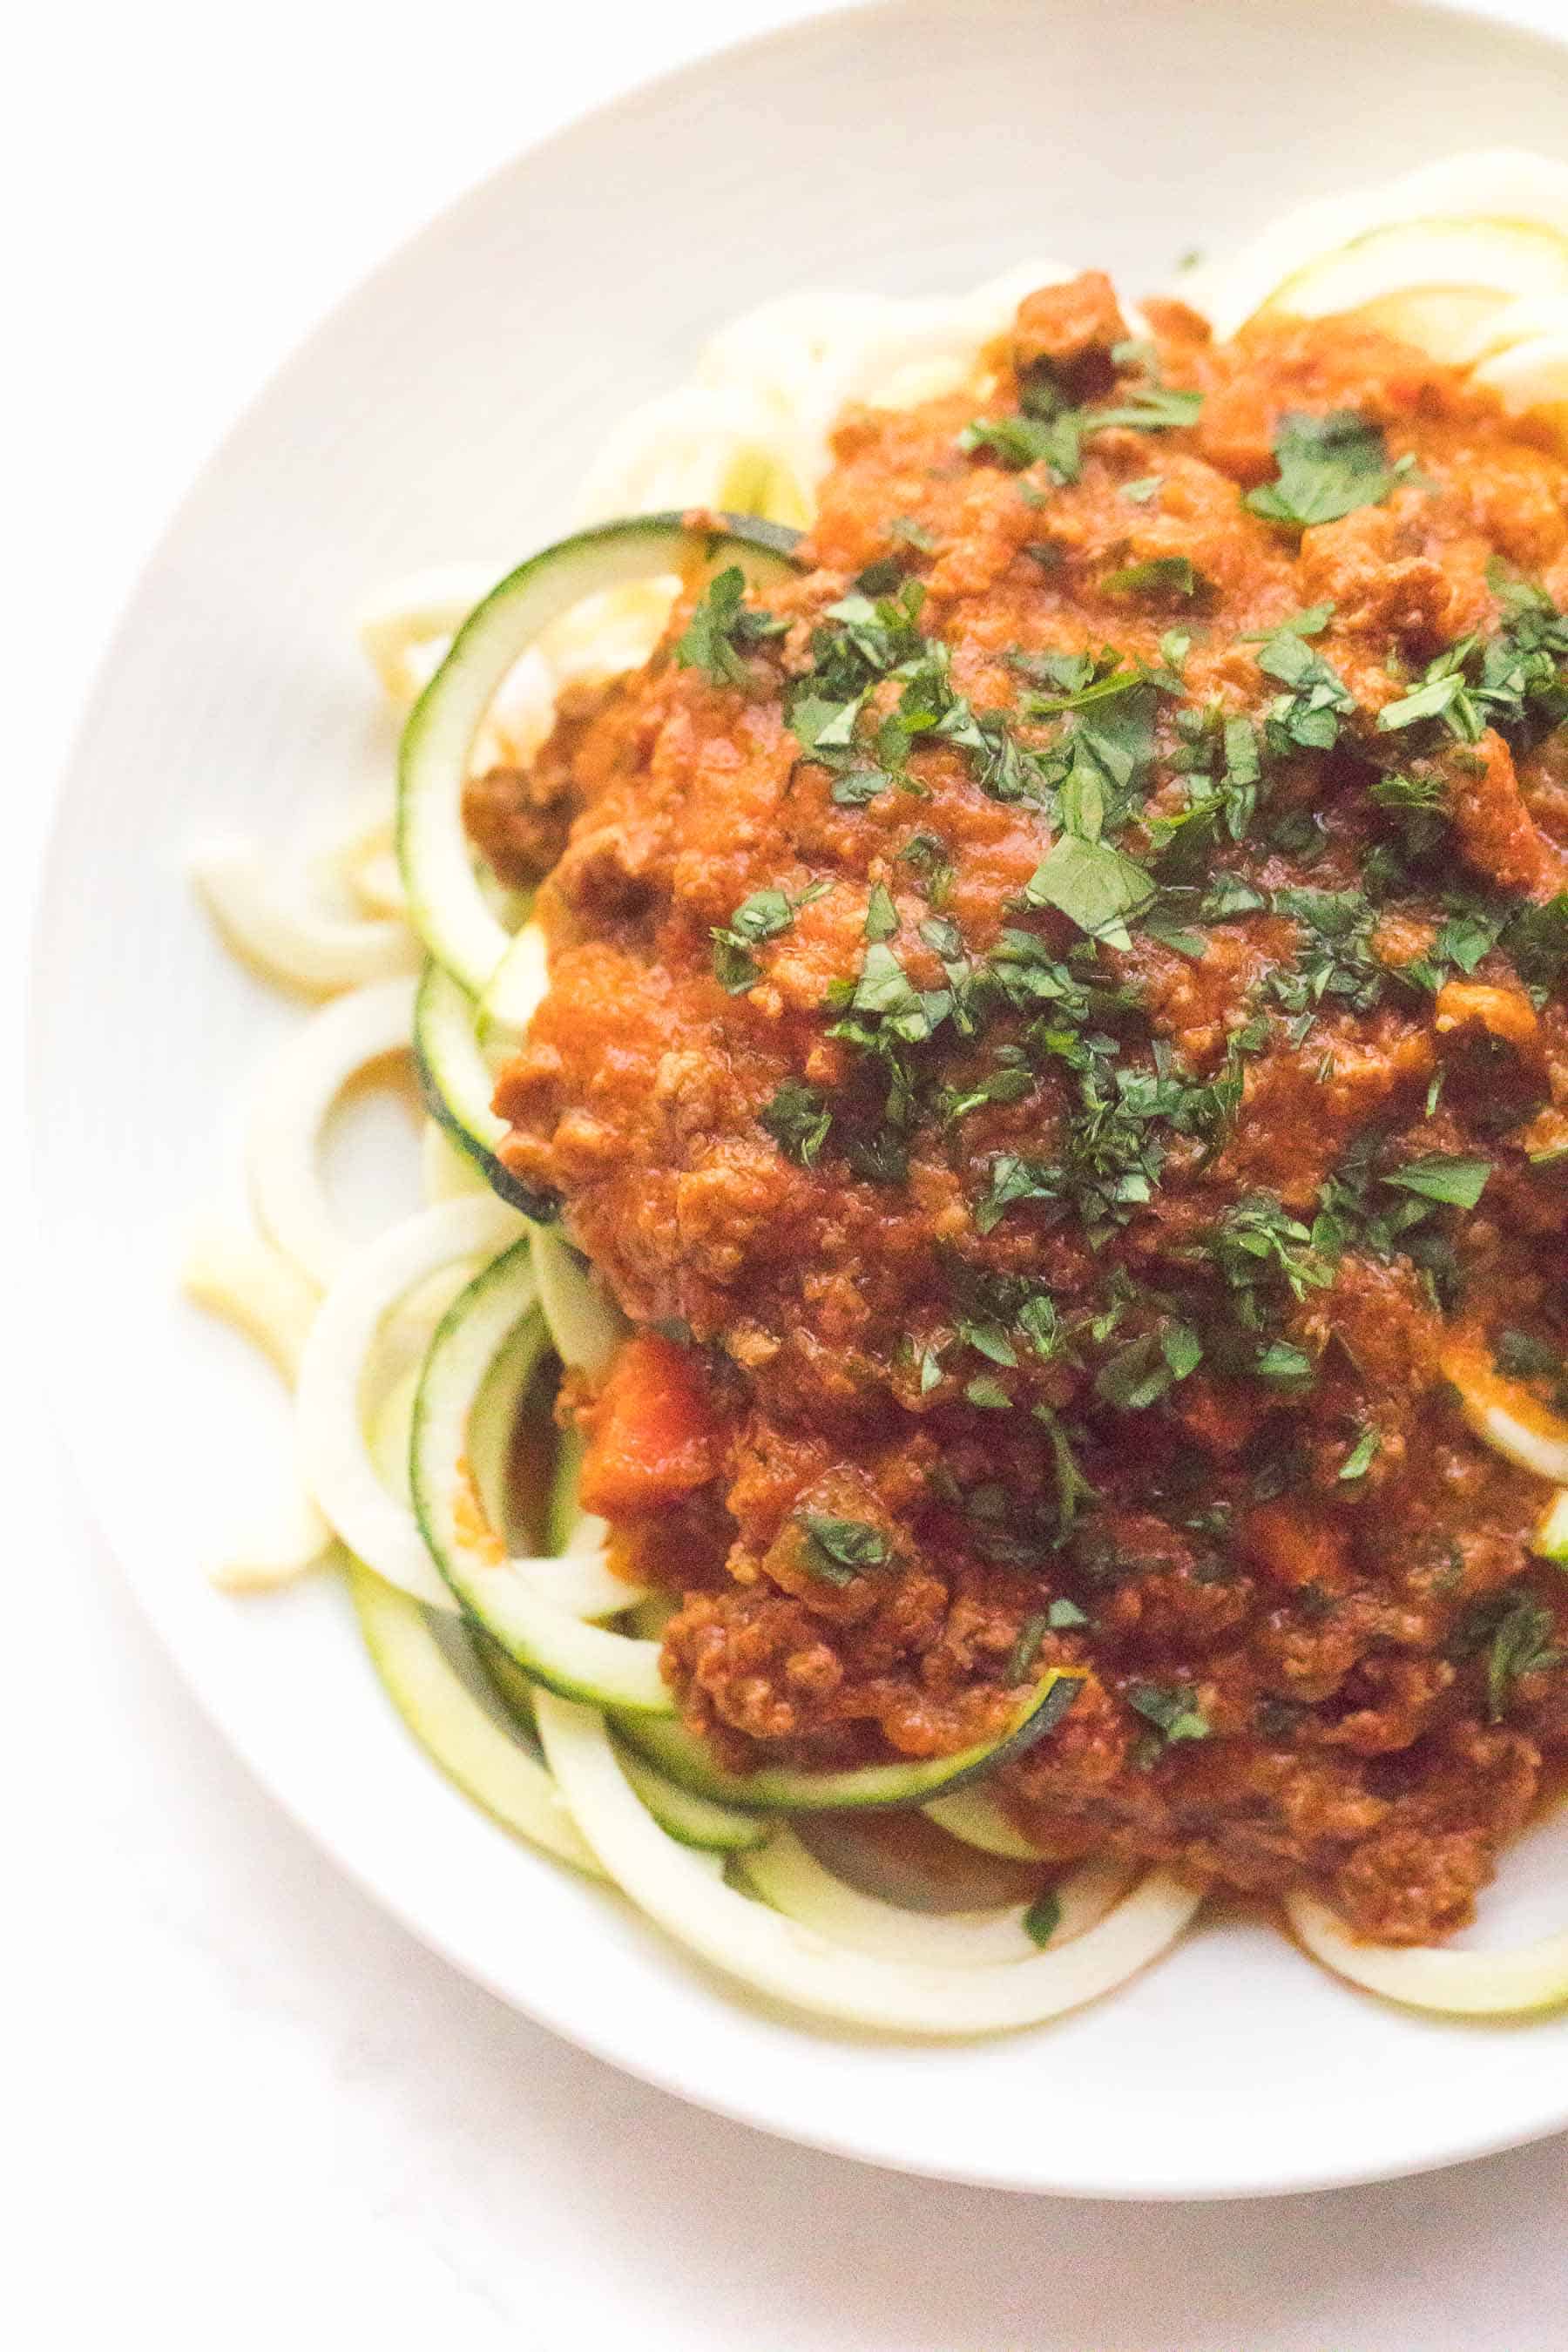 Zucchini noodles with red bolognese sauce on a white plate and background